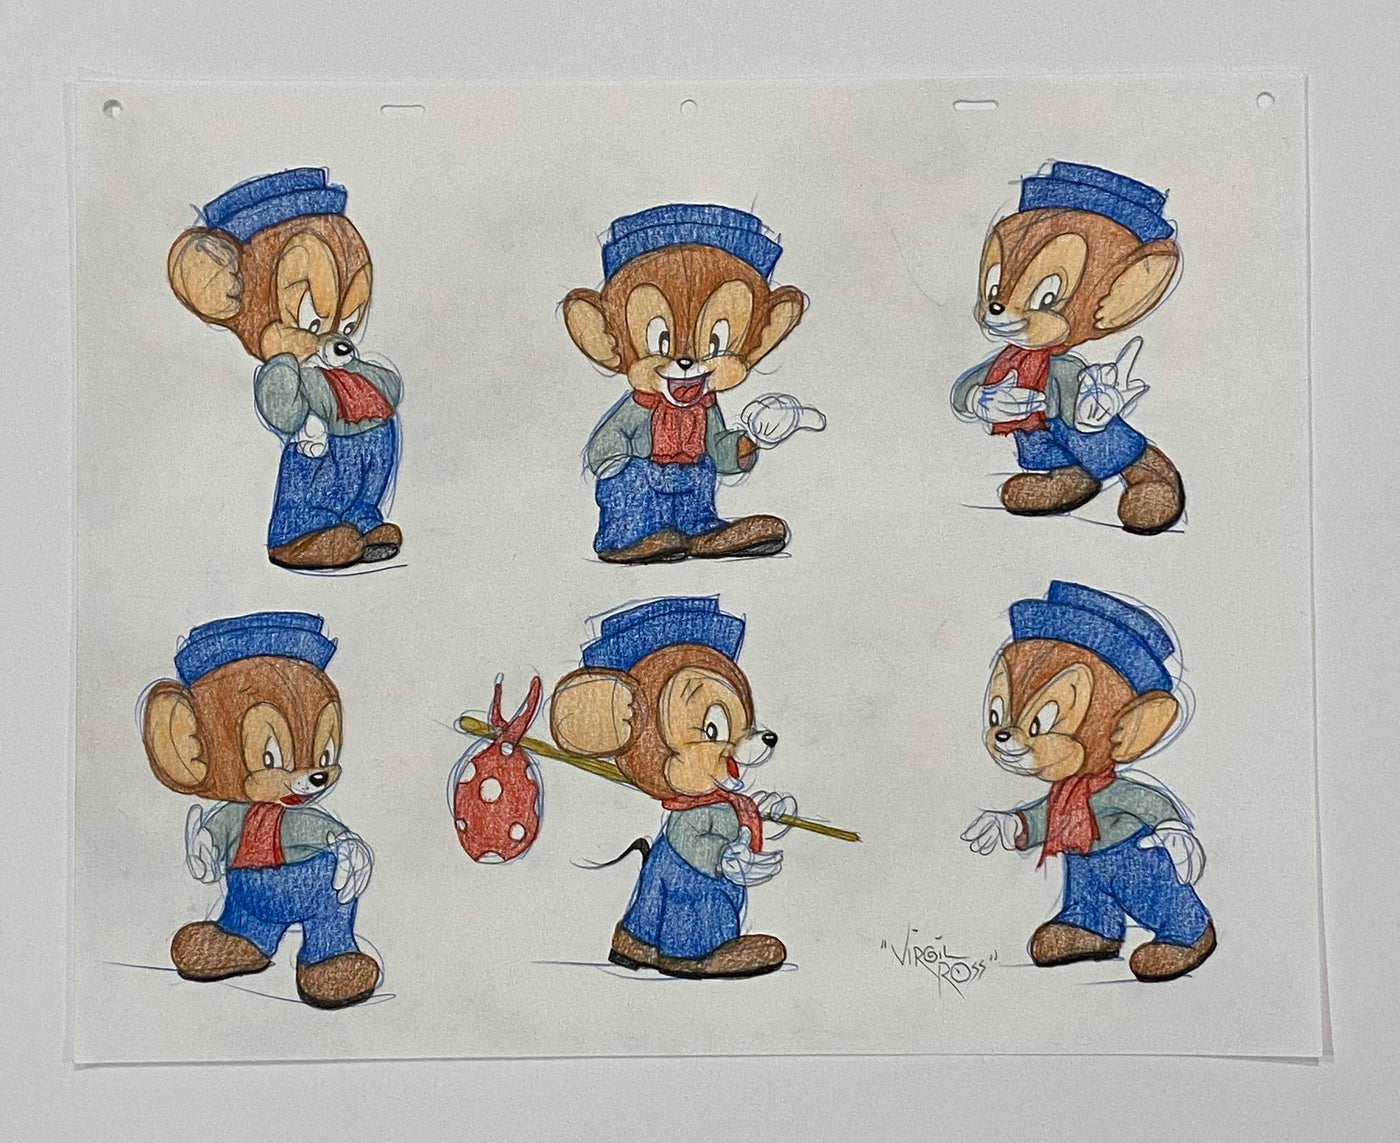 Original Warner Brothers Virgil Ross Model Sheet Animation Drawing featuring Sniffles the Mouse